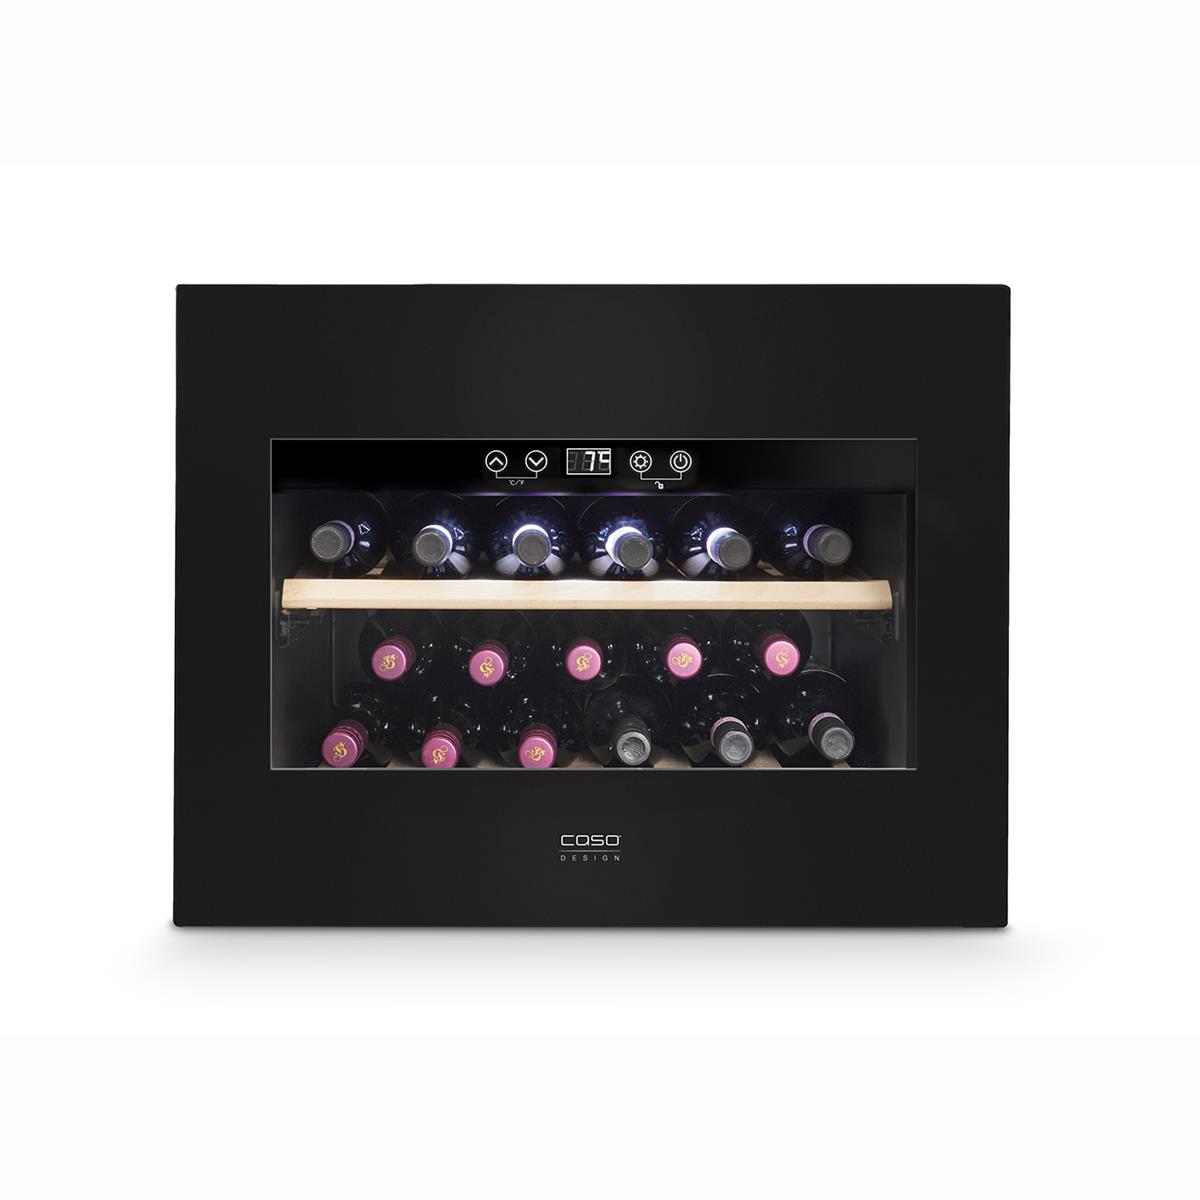 WineDeluxe E 18 Wine cellar for up to 18 bottles, 1 temperature zone